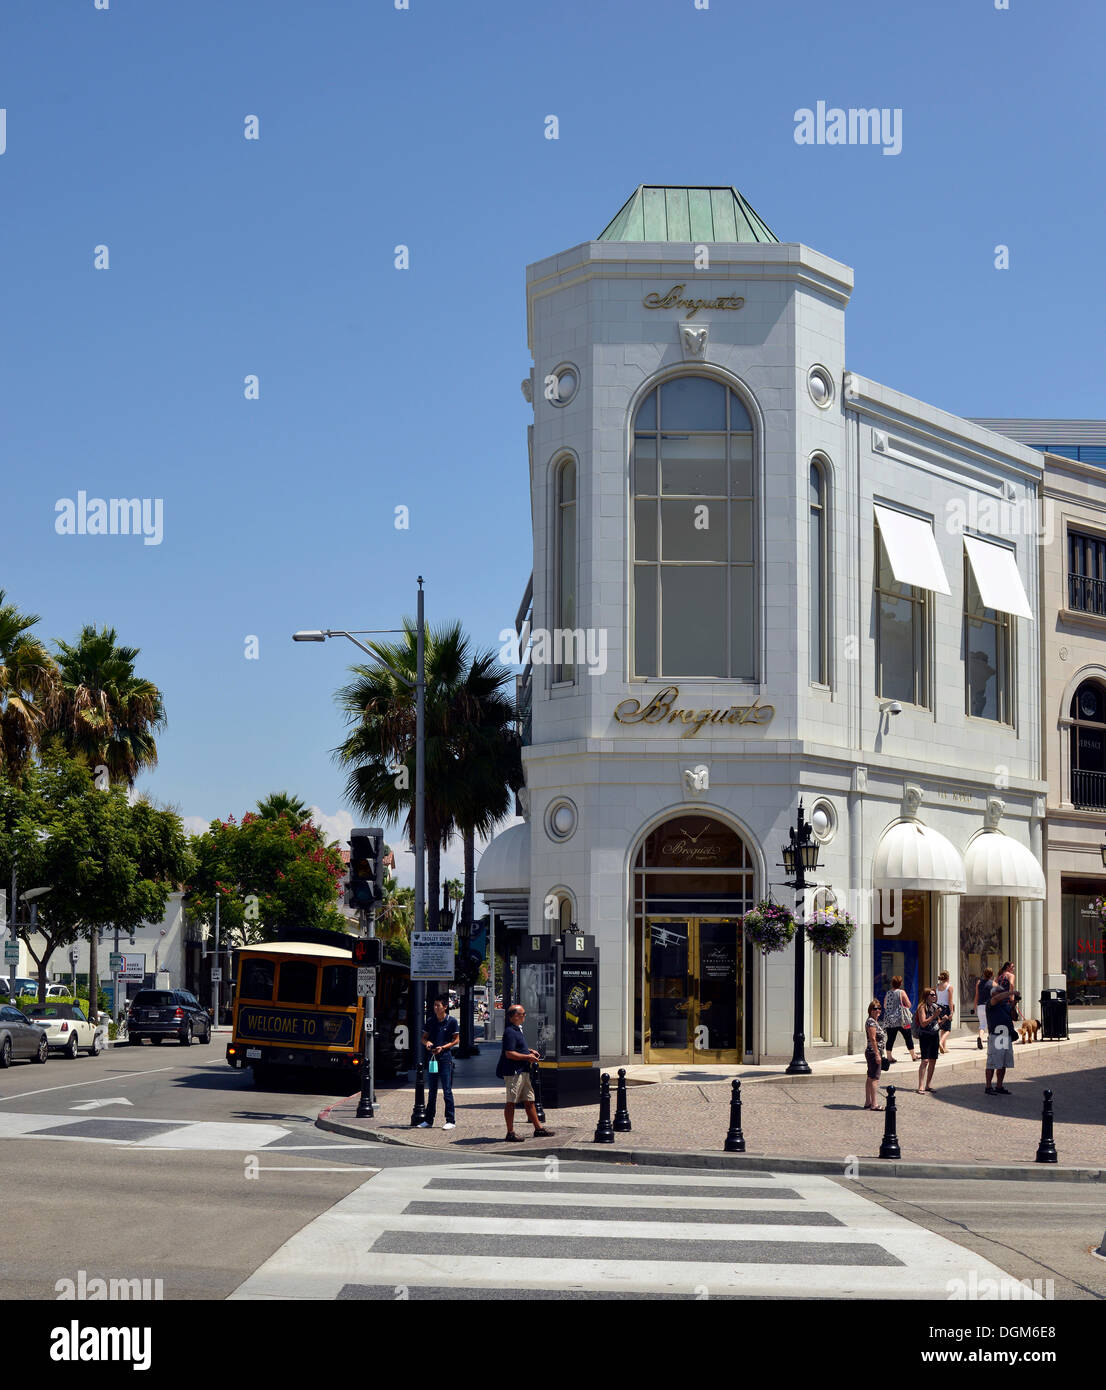 Two Rodeo Drive, Rodeo Drive luxury shopping street, Beverly Hills, Los  Angeles, California, United States of America, USA Stock Photo - Alamy